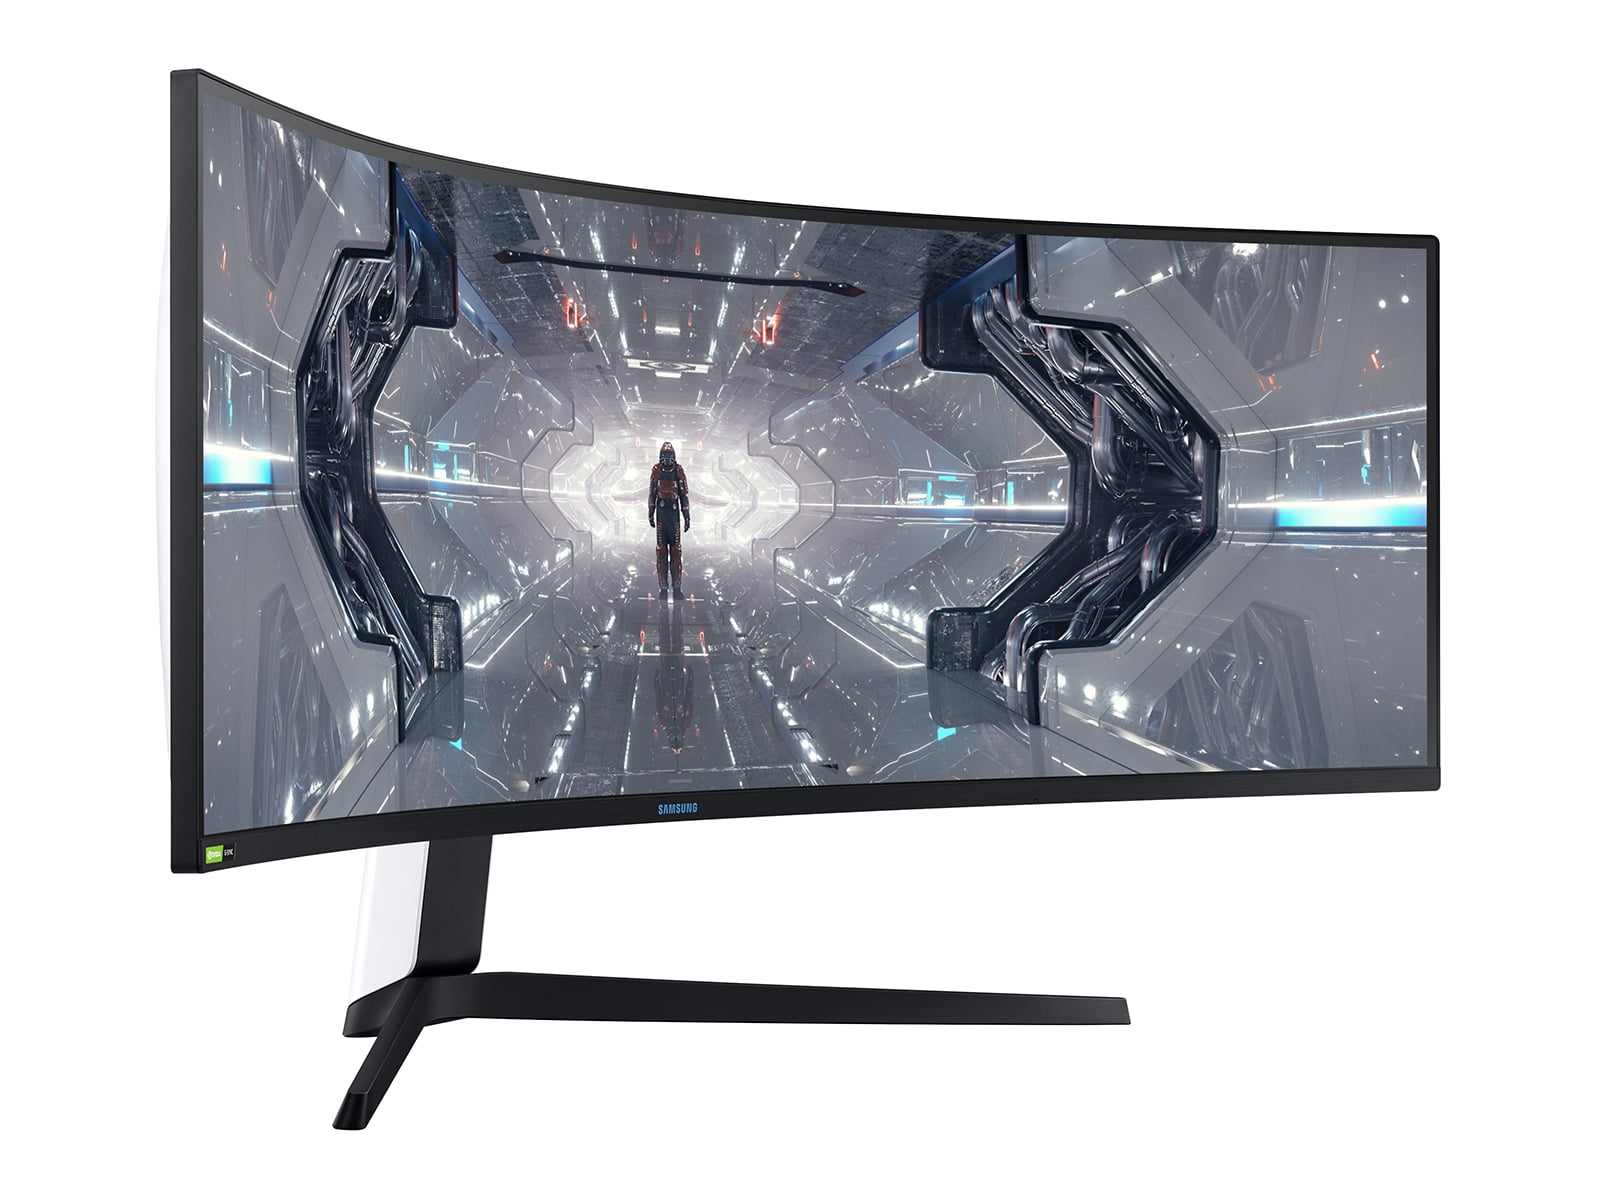 SAMSUNG 49" Class 1000R Curved (5120 x 1440) Gaming Monitor - LC49G97TSSNXDC - image 2 of 8